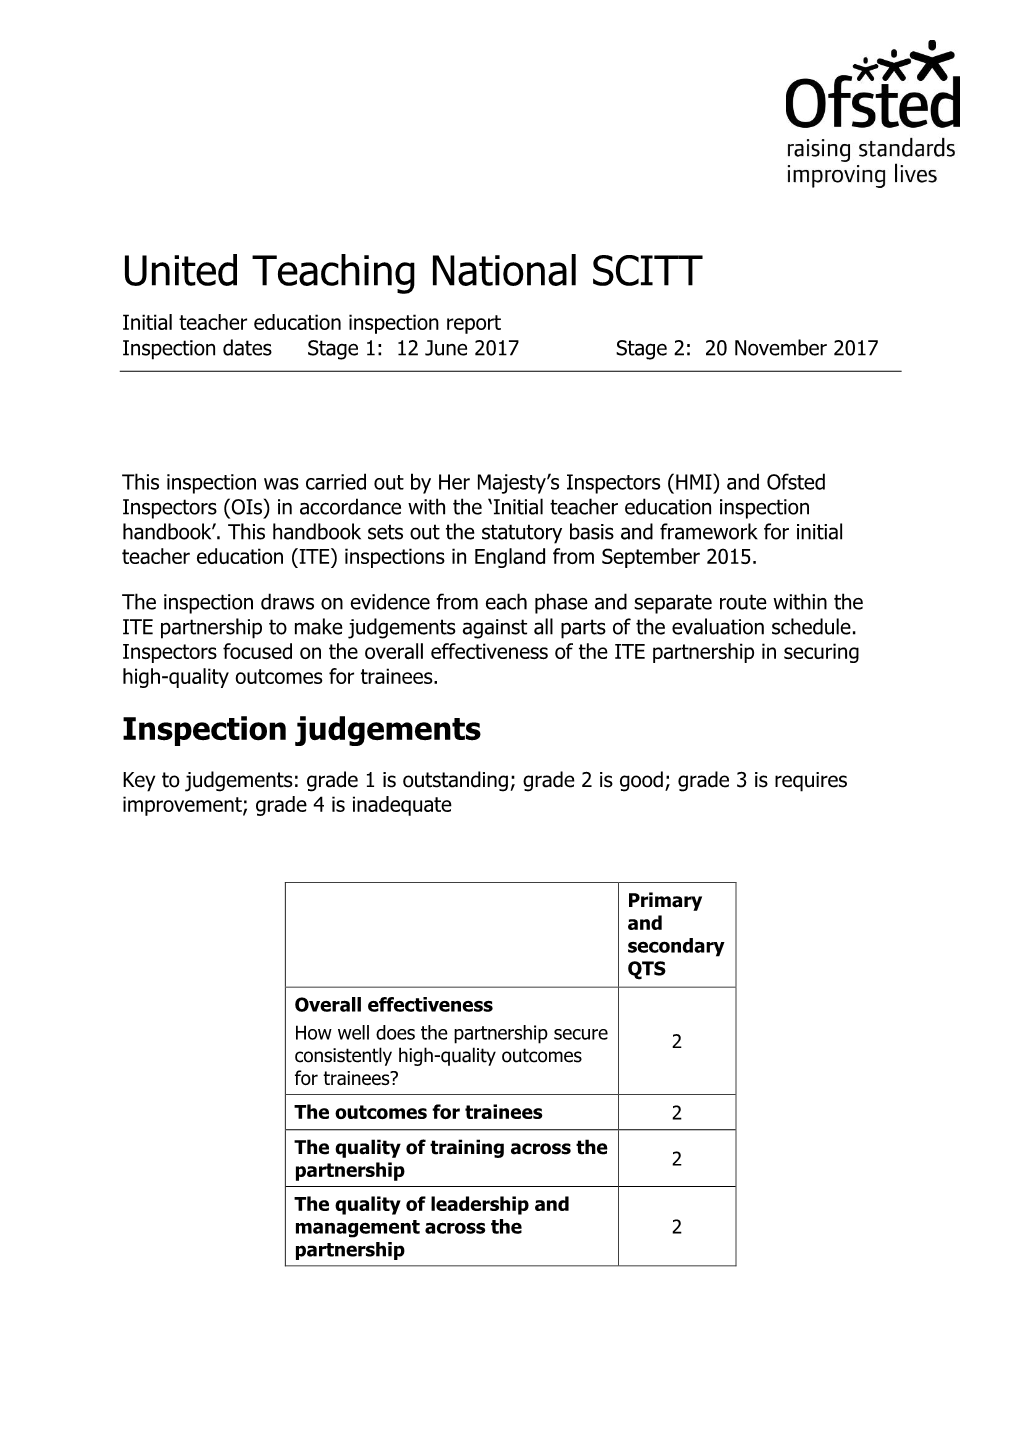 United Teaching National SCITT Initial Teacher Education Inspection Report Inspection Dates Stage 1: 12 June 2017 Stage 2: 20 November 2017